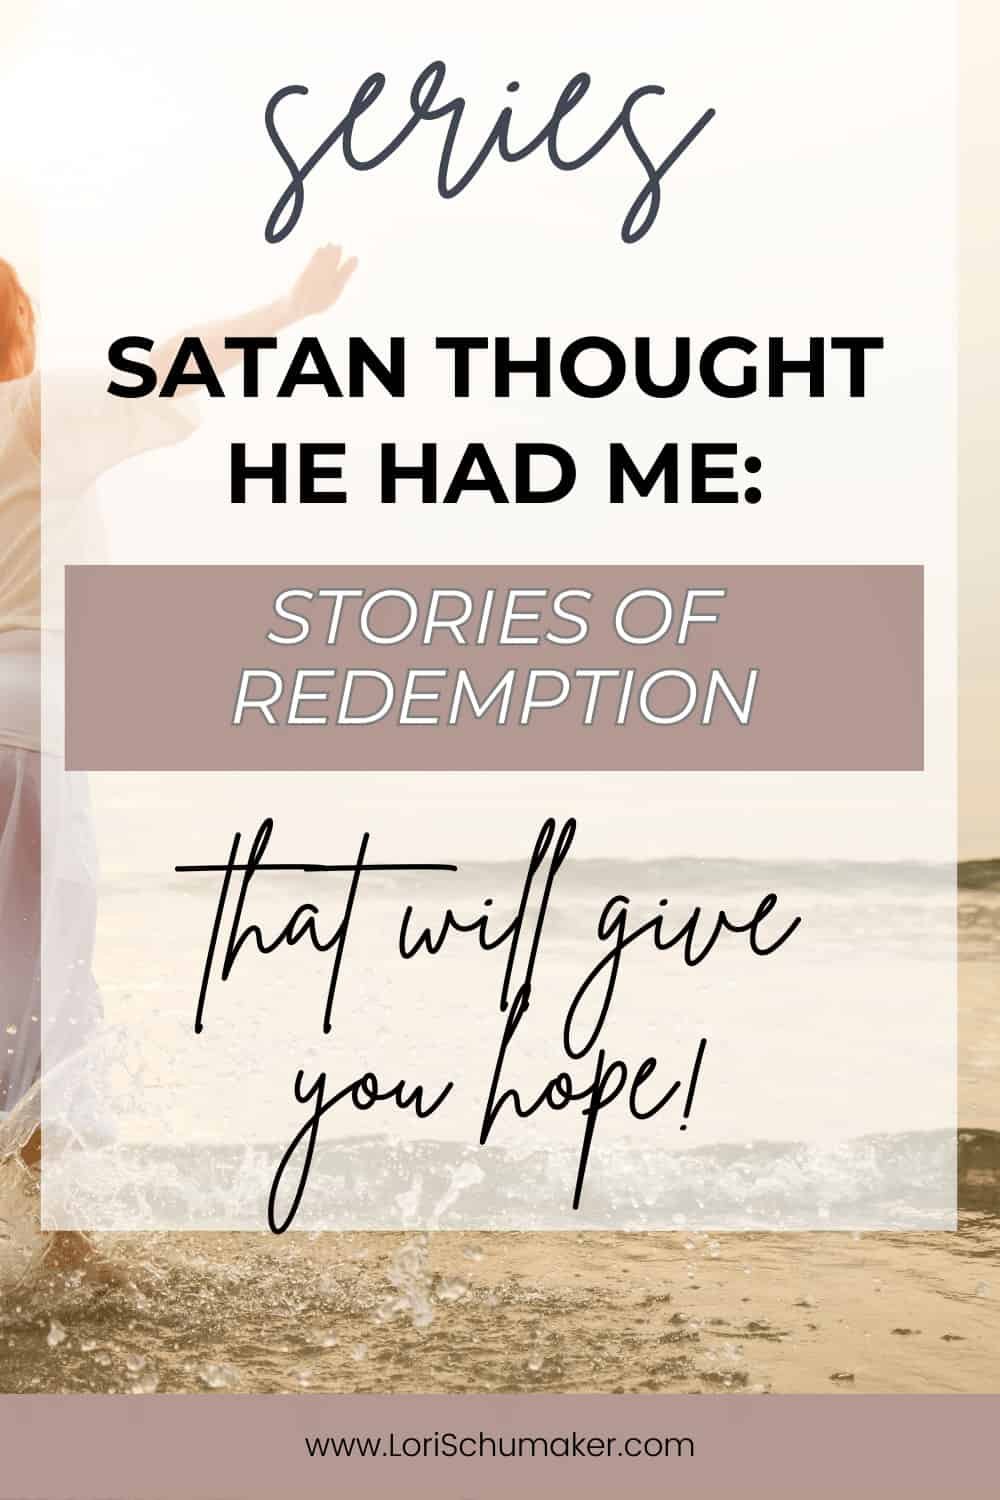 Hear stories of redemption that will inspire hope in you. They will show you how you can overcome the darkest, most painful parts of life through the redemption found in Christ. Read and join women sharing their most difficult seasons of life so that you may find hope and someday share your story to help others!